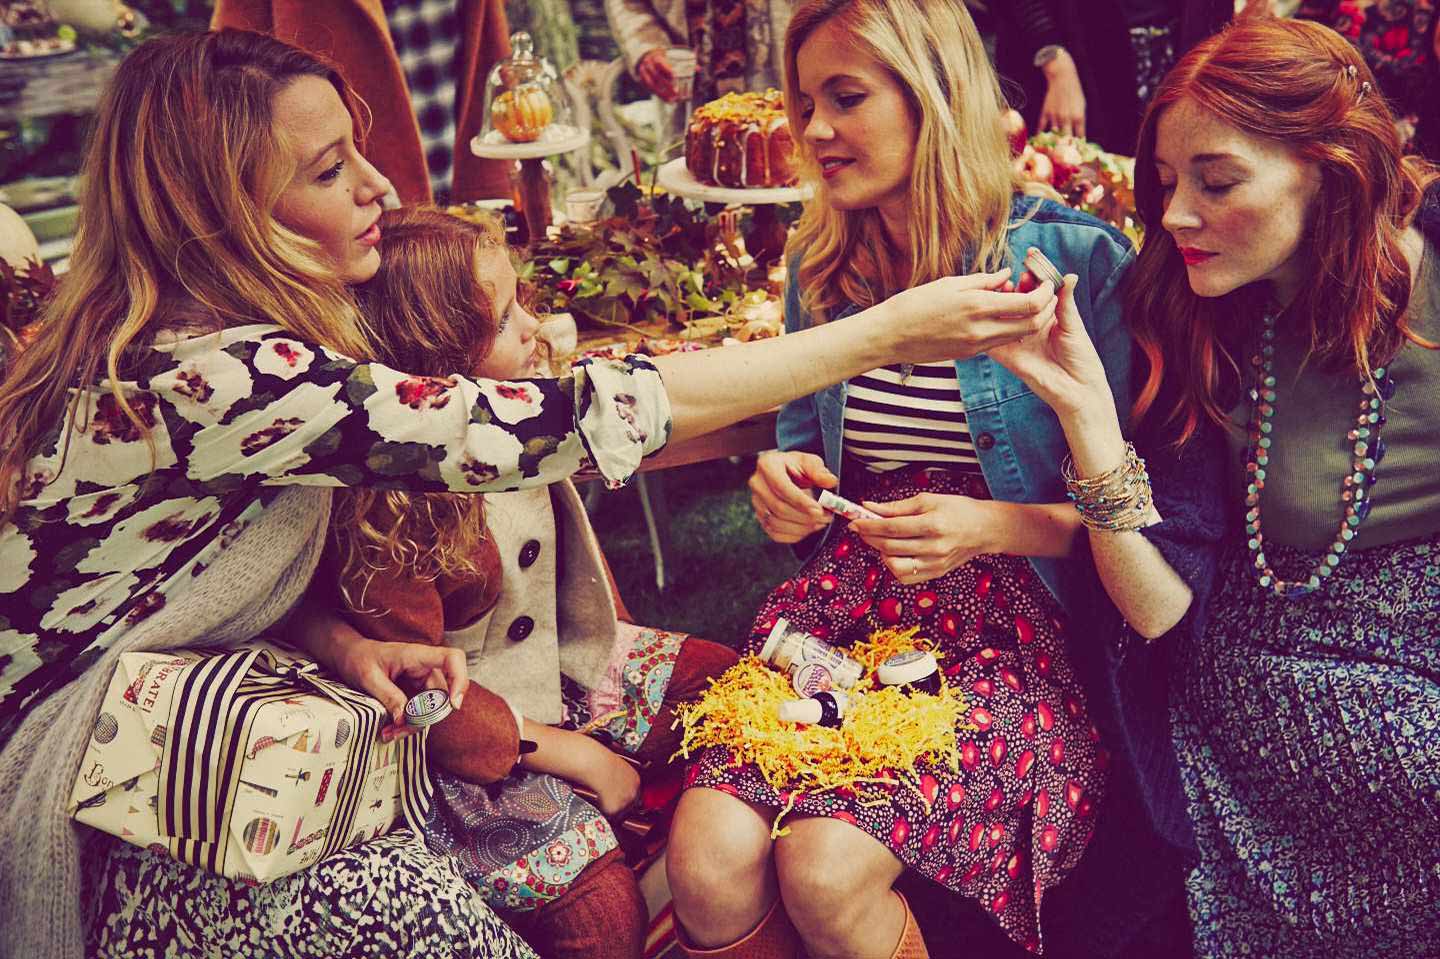 Blake Lively's Baby Shower Bringing up Baby | Preserve - Photography by Eric Lively - Blake Lively's Preserve